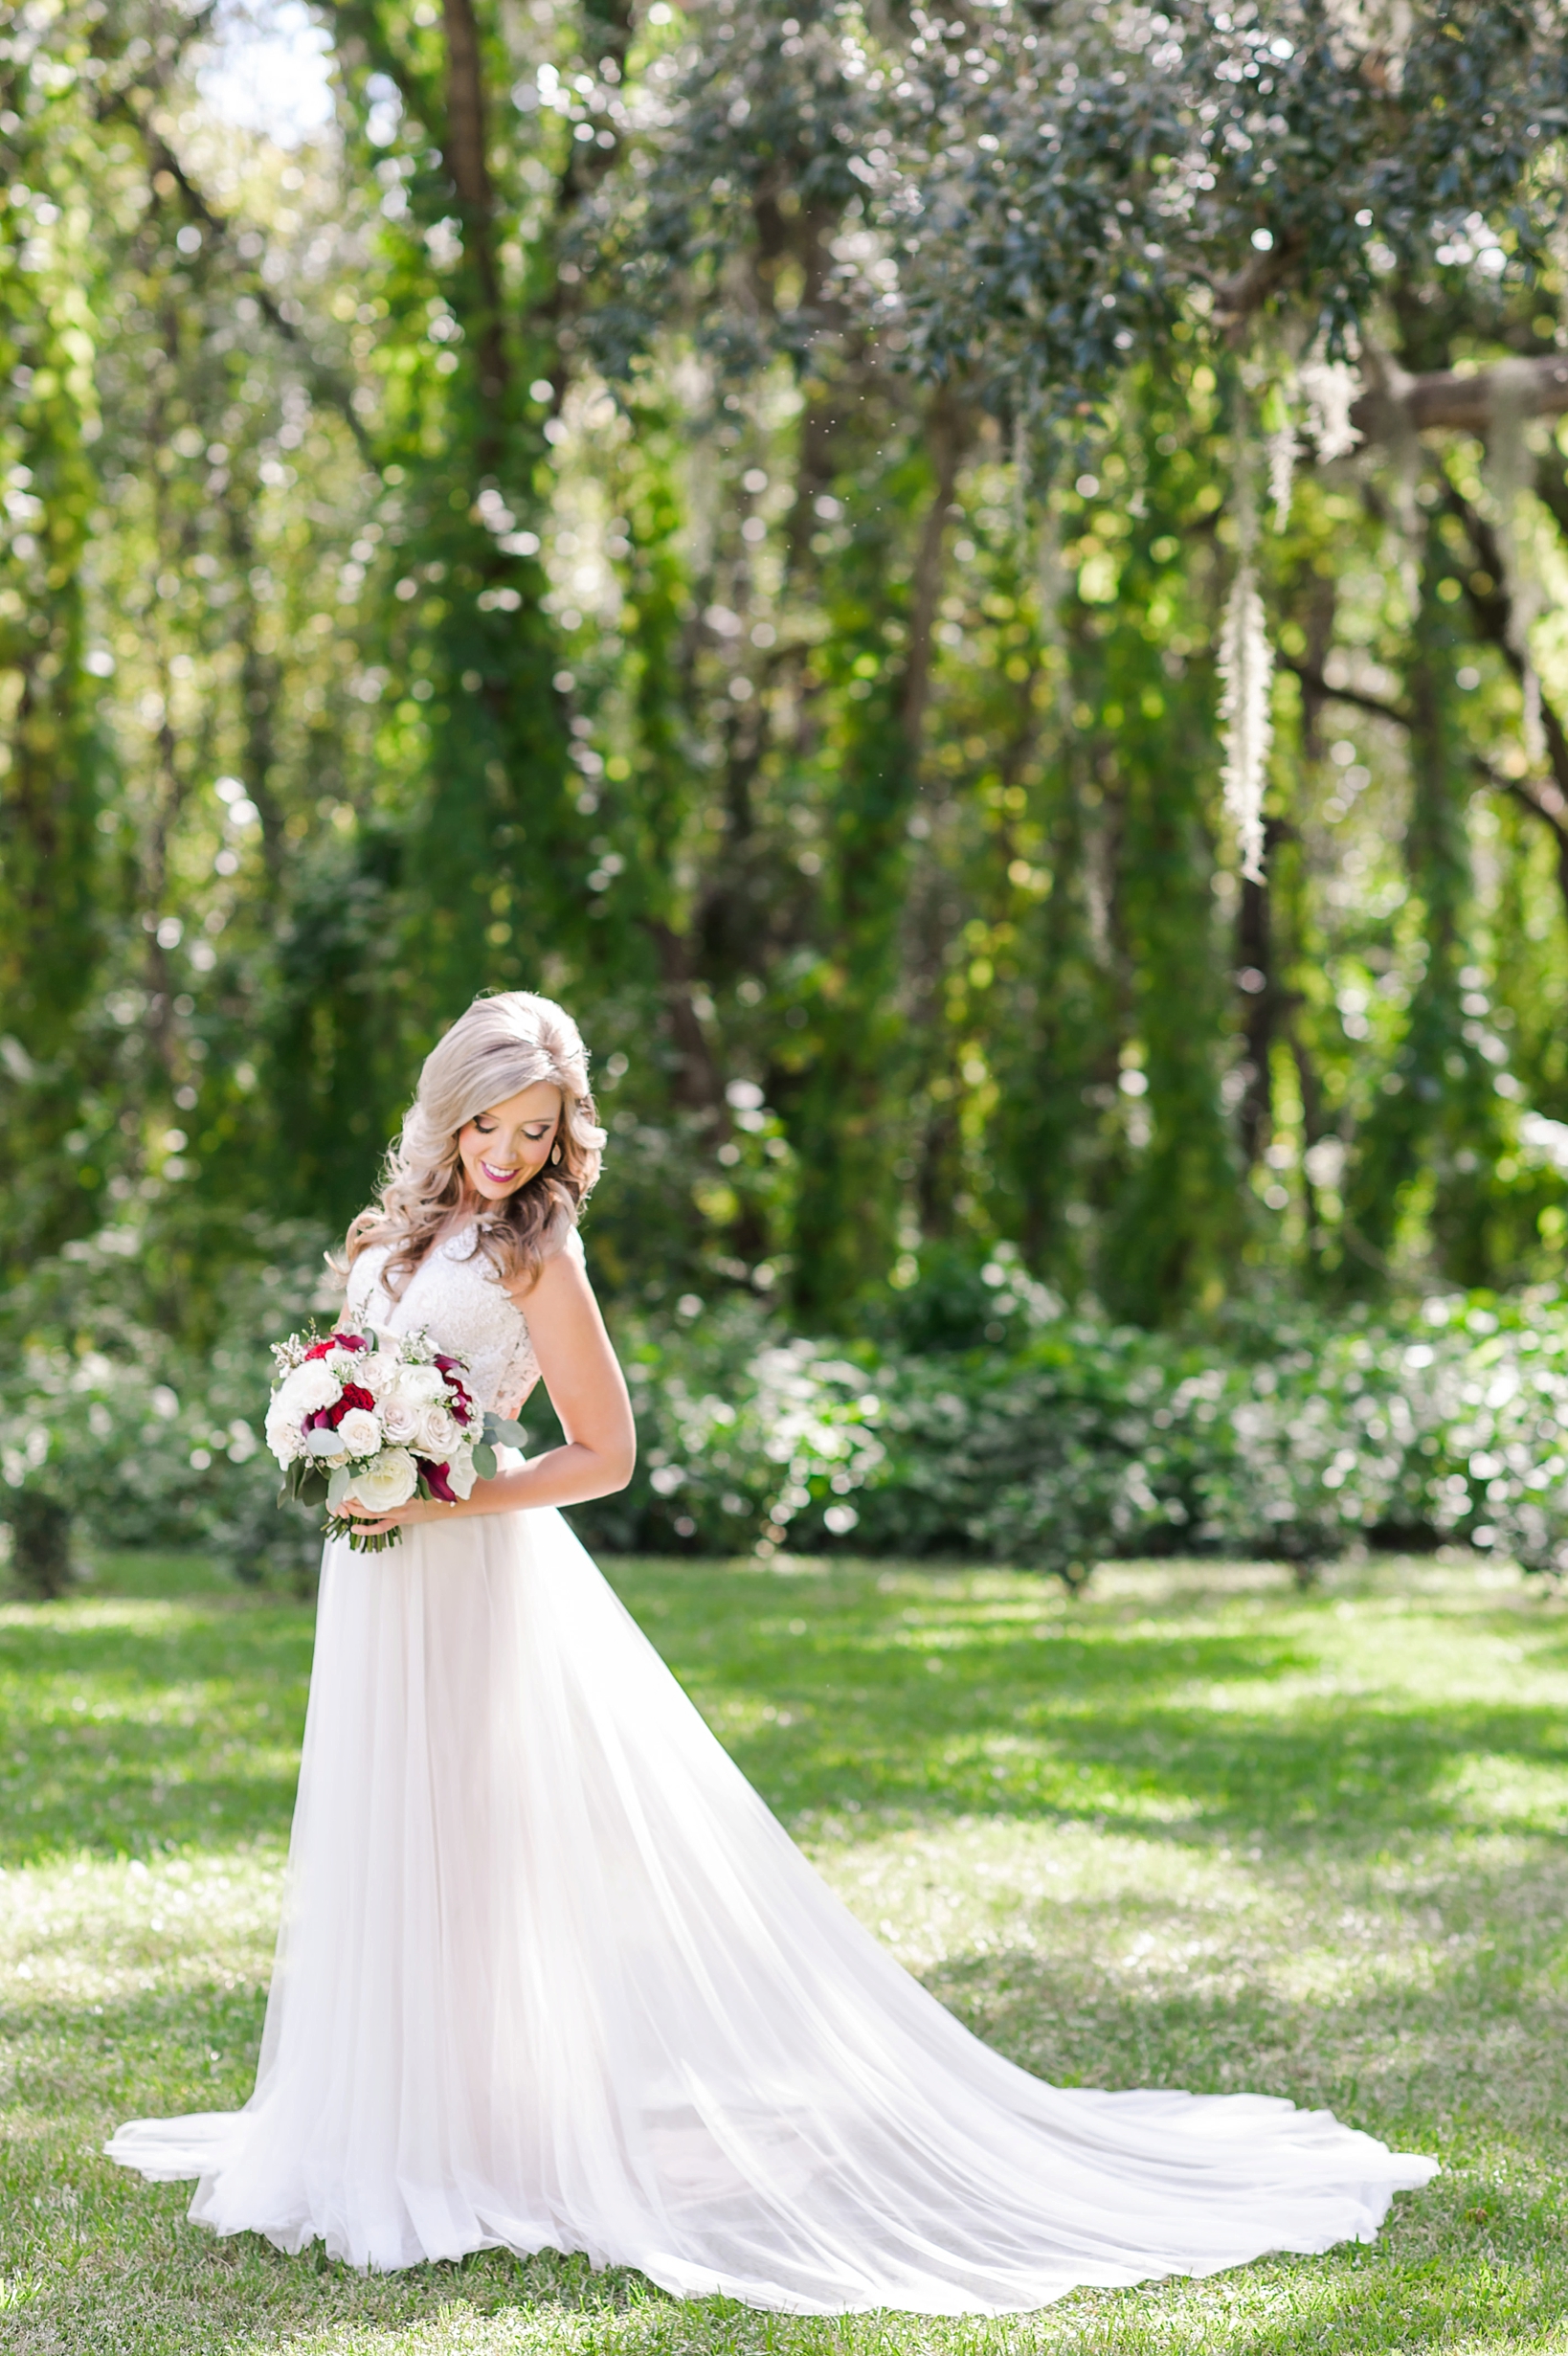 Beautiful wedding photo of the bride dappled in sunlight by Sarah & Ben Photography 